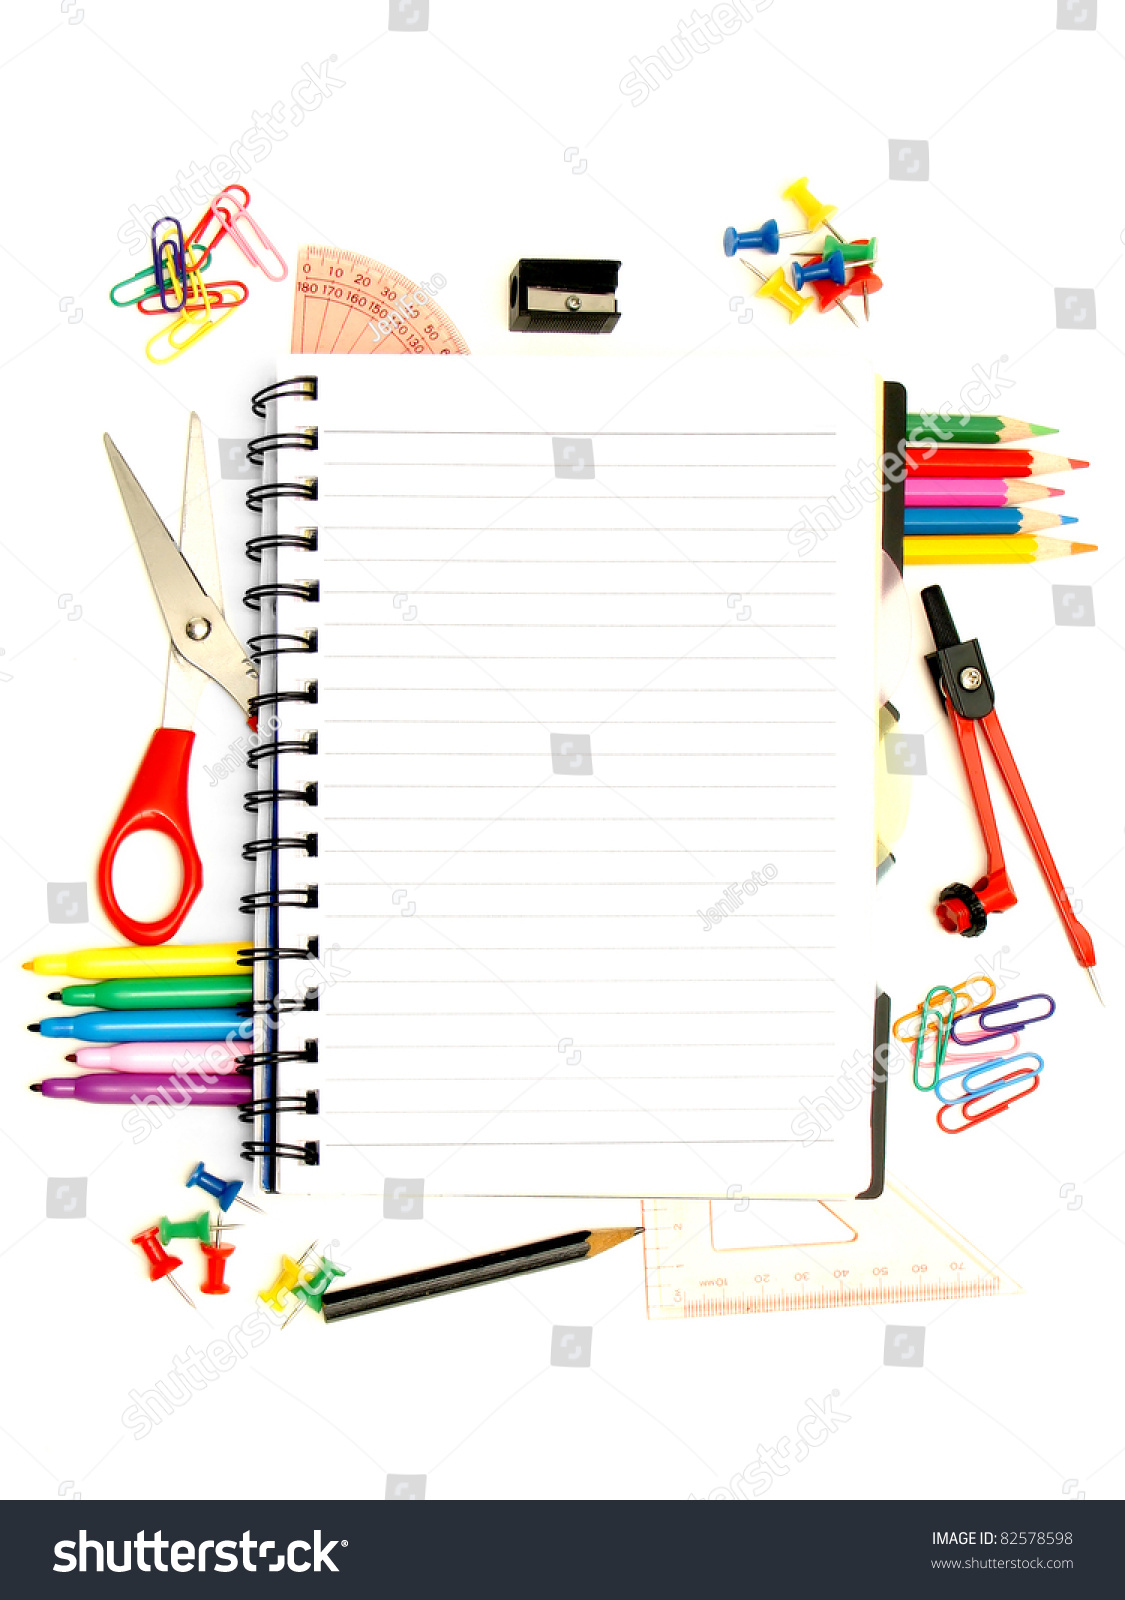 free clip art of office supplies - photo #50